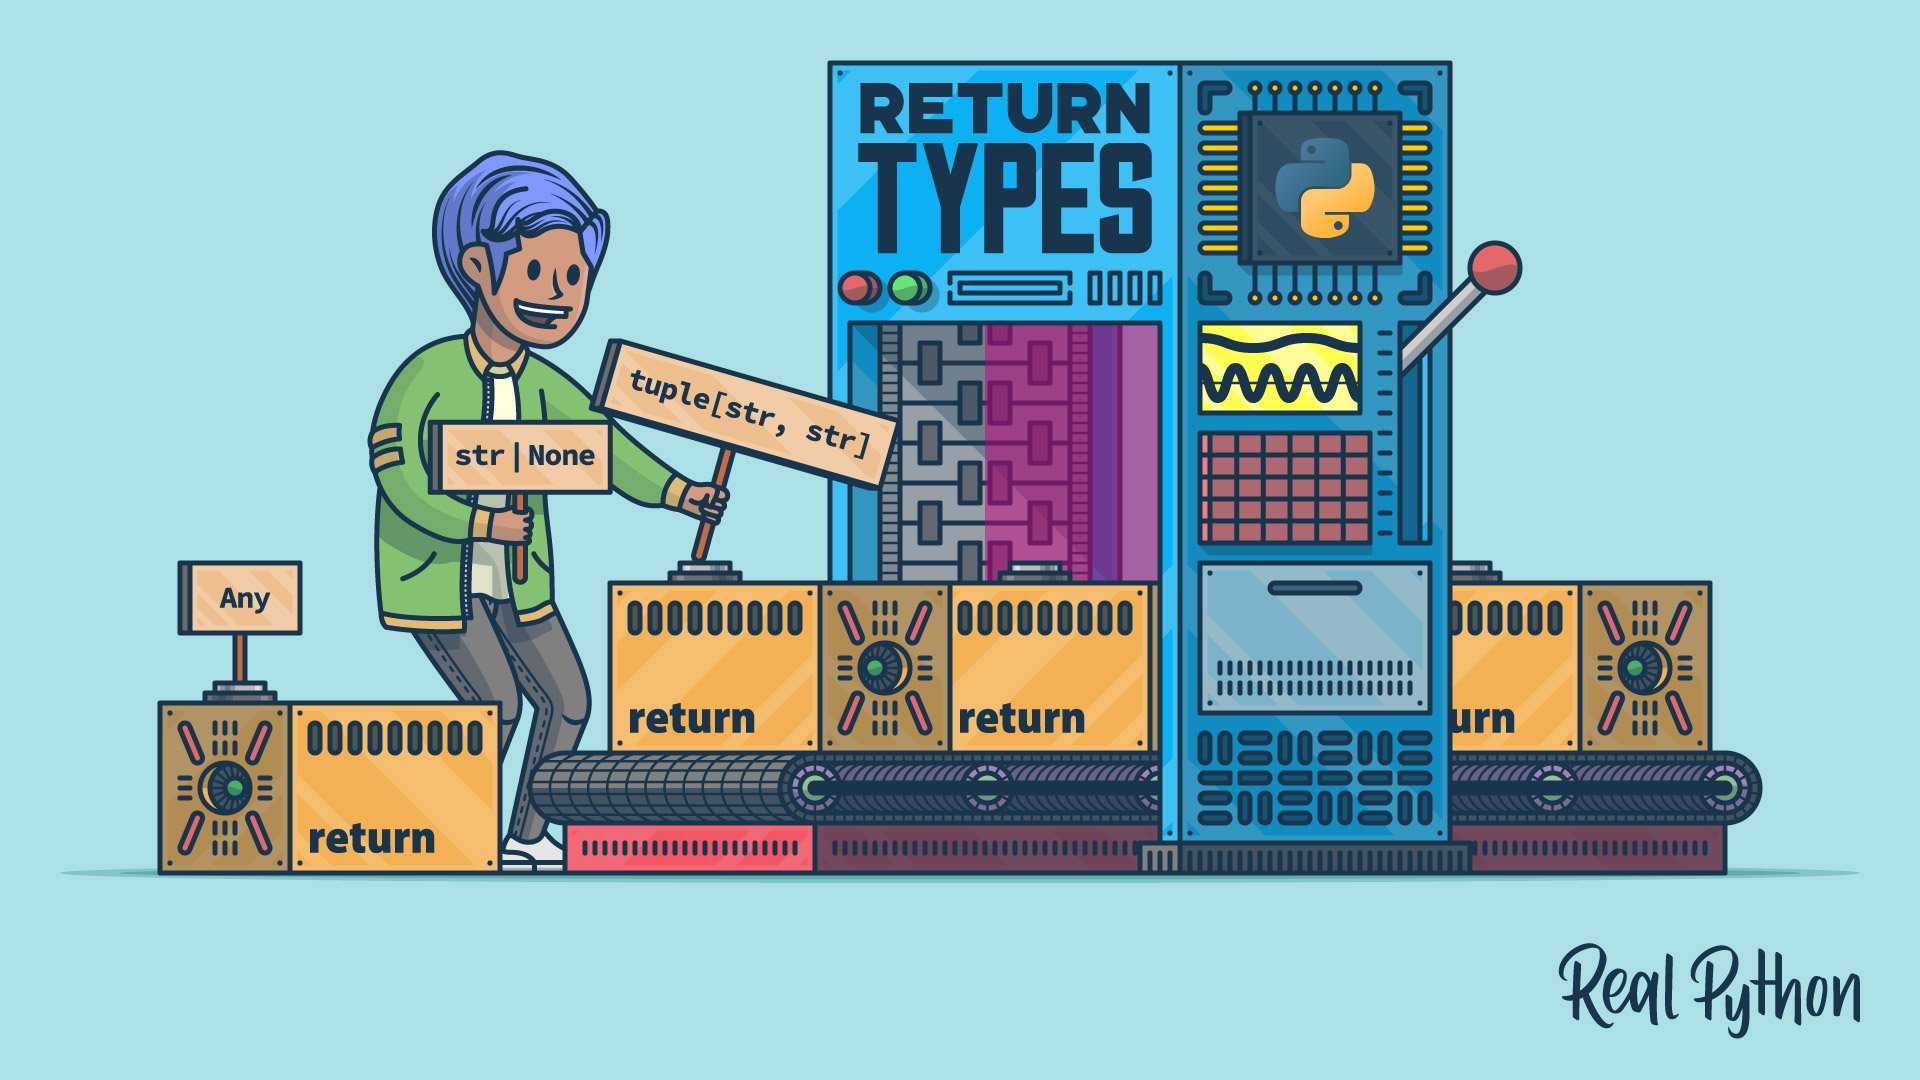 How to Use Type Hints for Multiple Return Types in Python